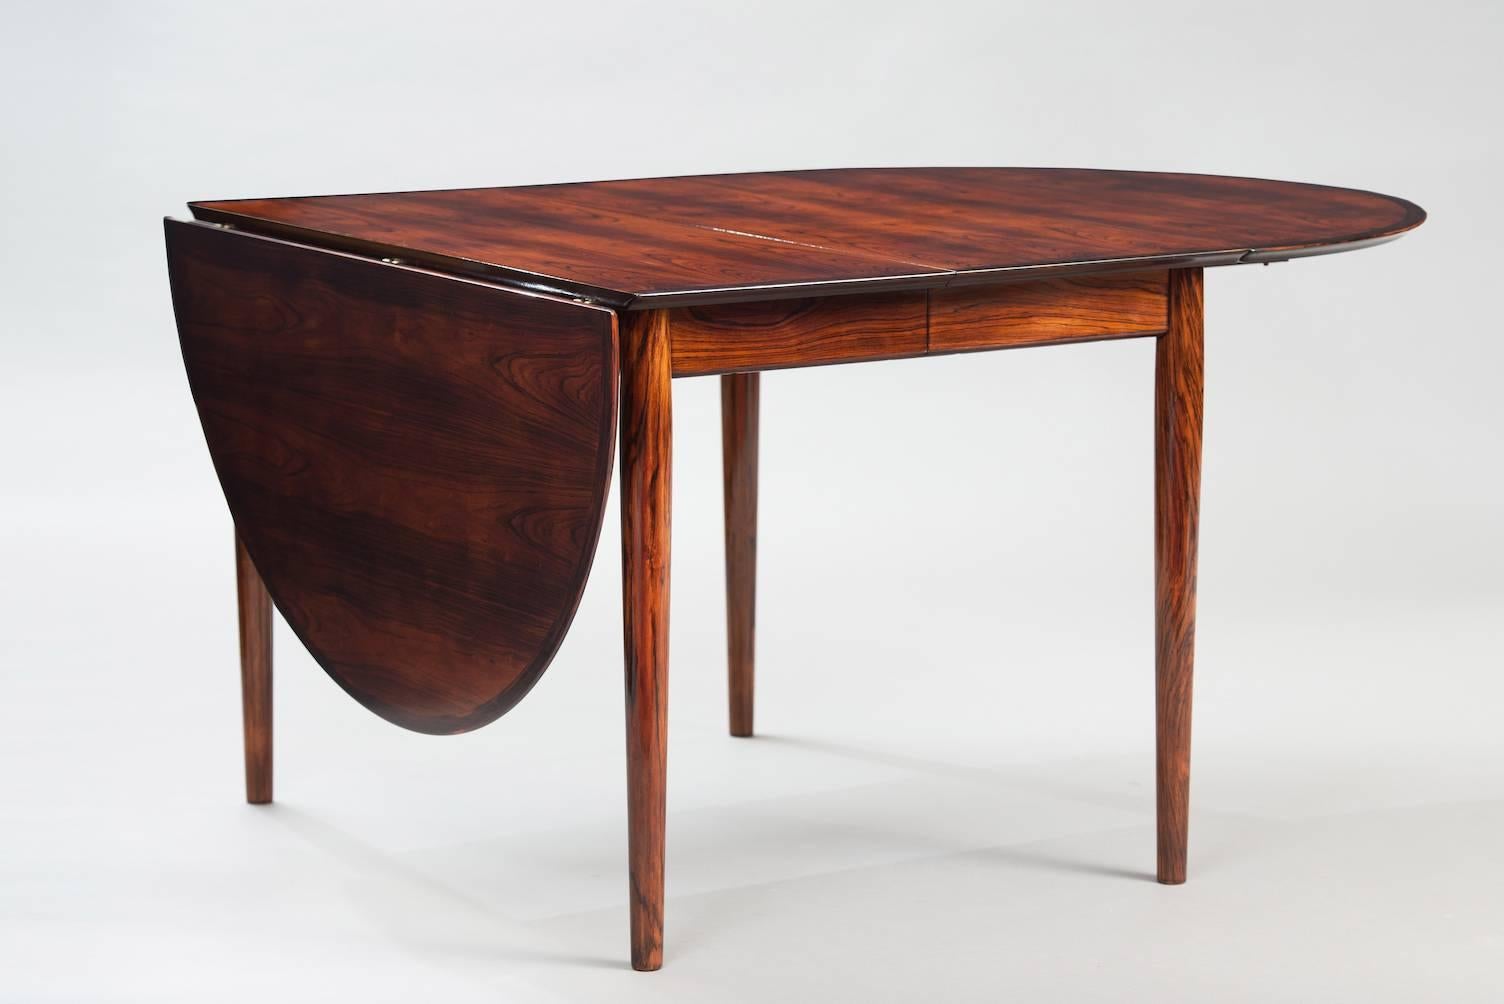 Rosewood dining table with two extension leaves (49.5 cm each) and two drop leaves, model 227.
Producer: Sibast Furniture.